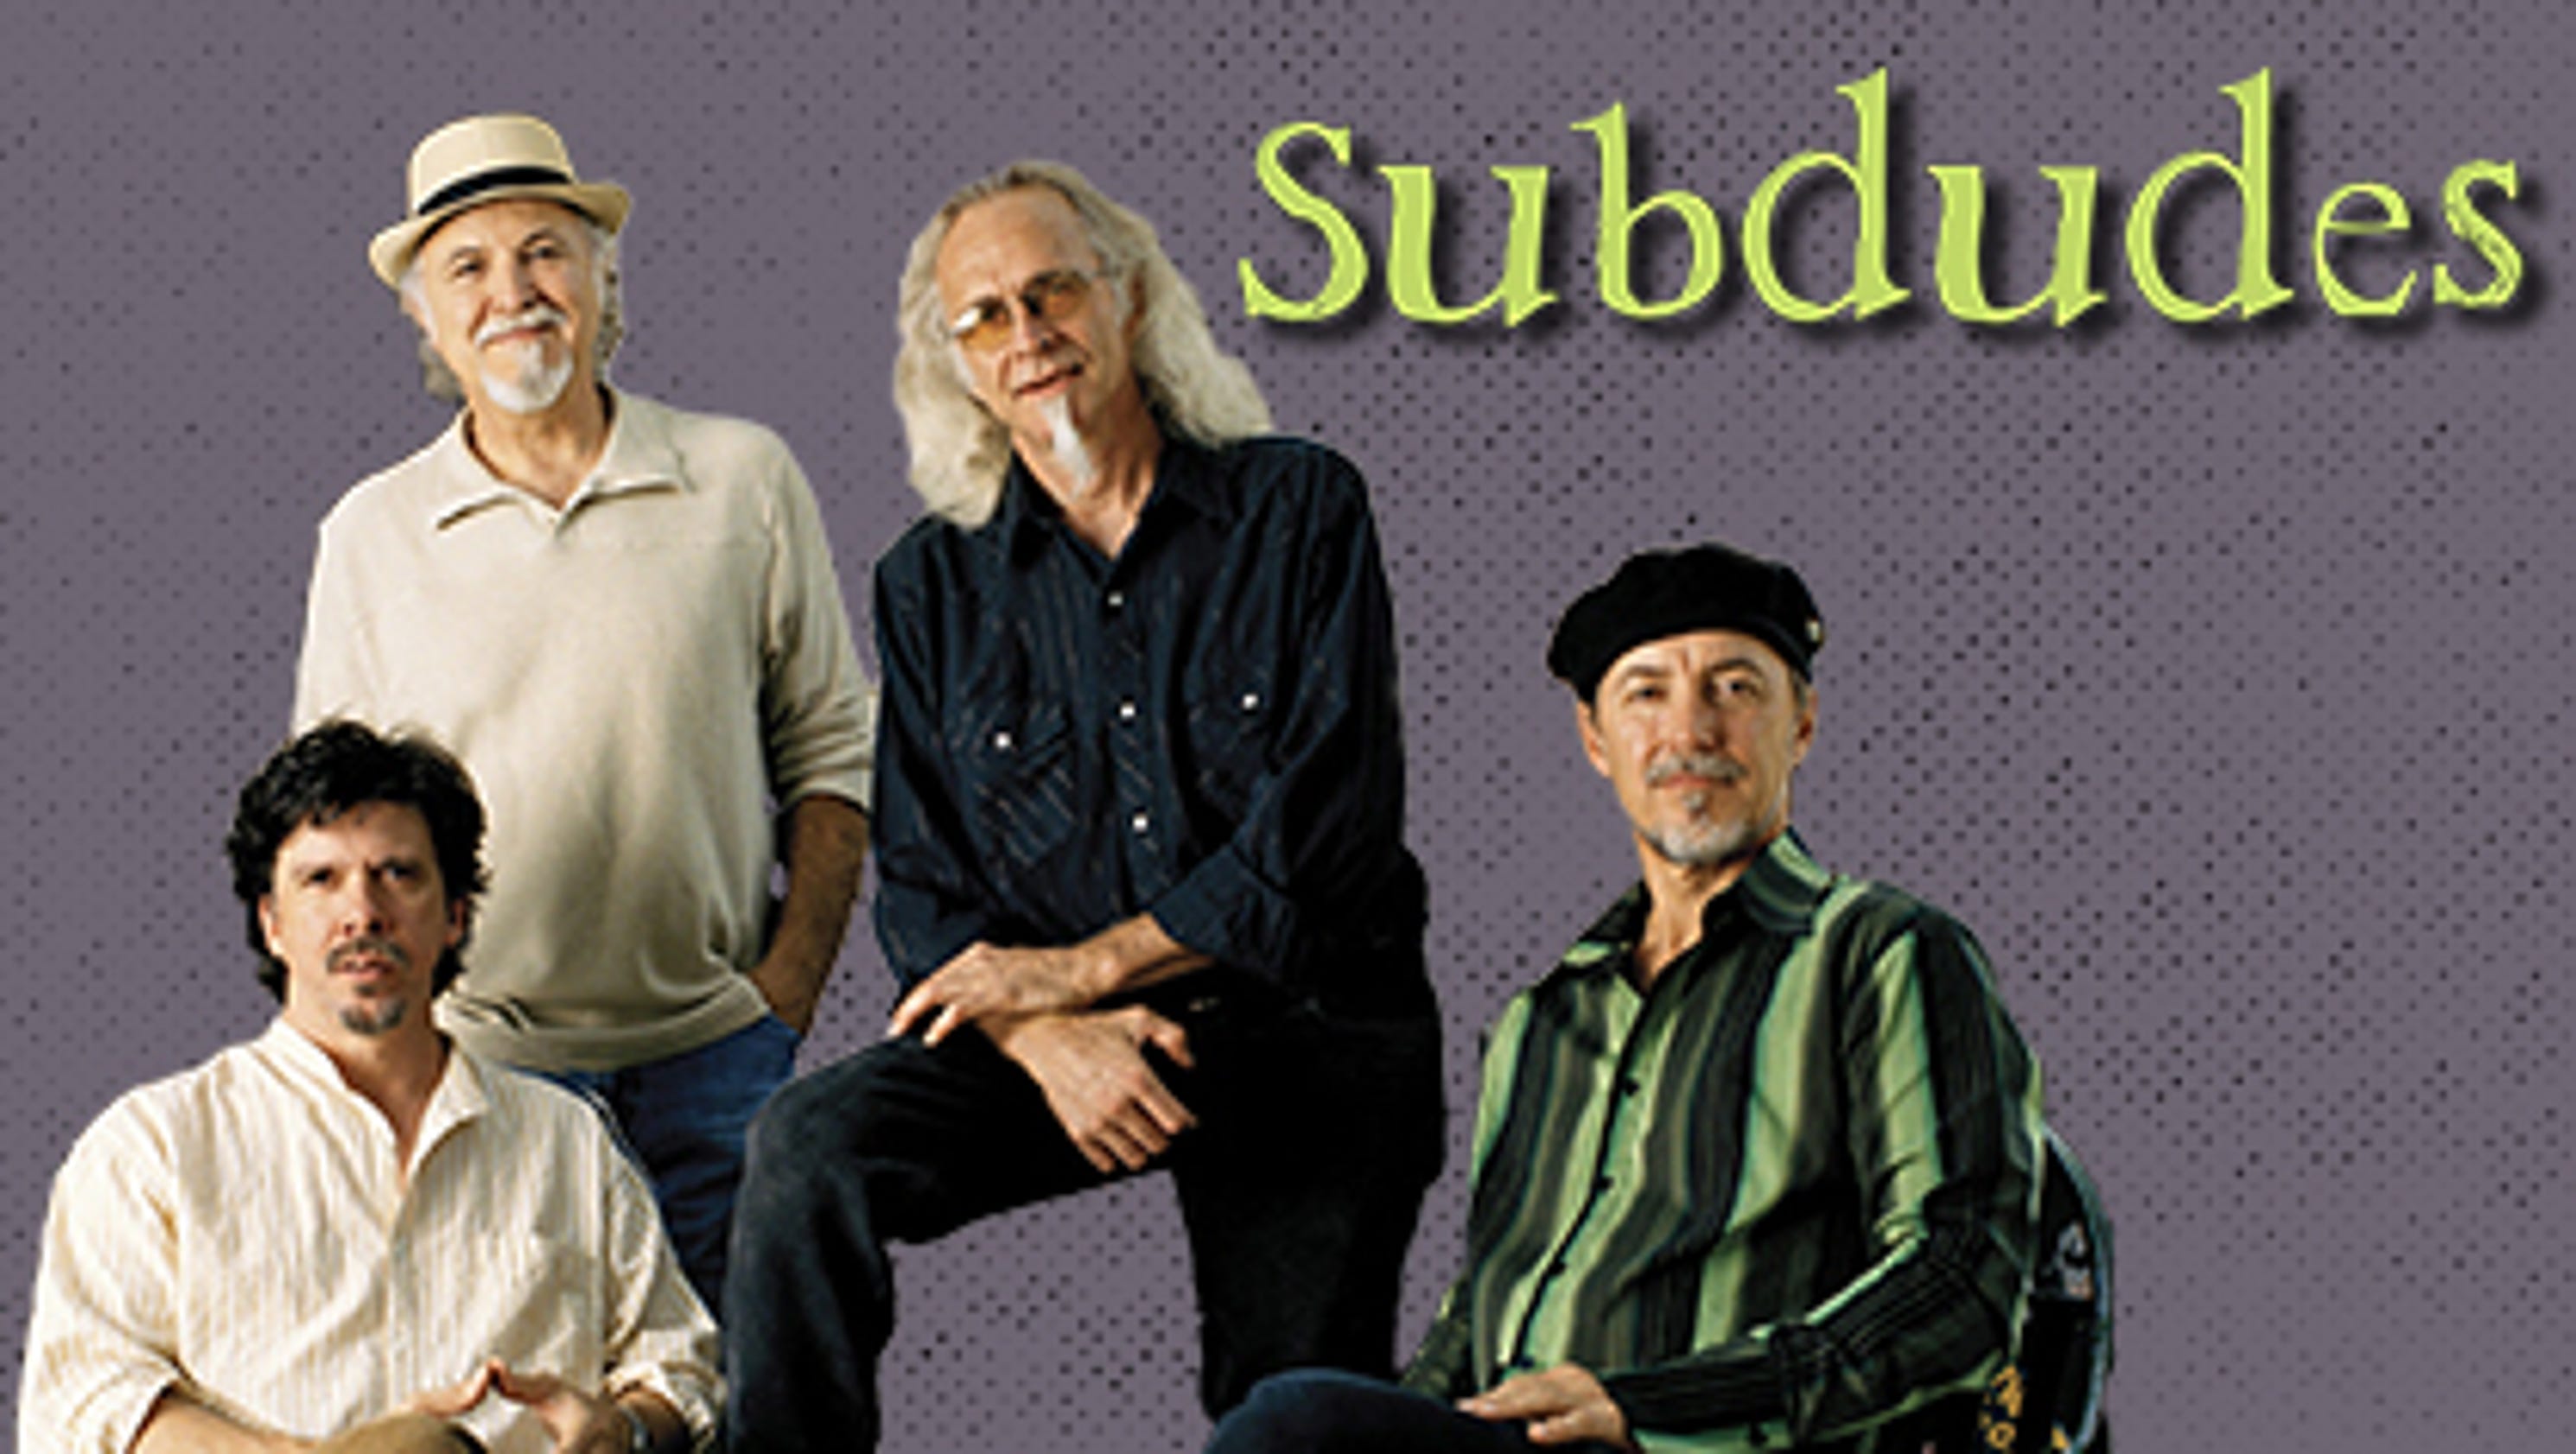 BOGO tickets to see The Subdudes